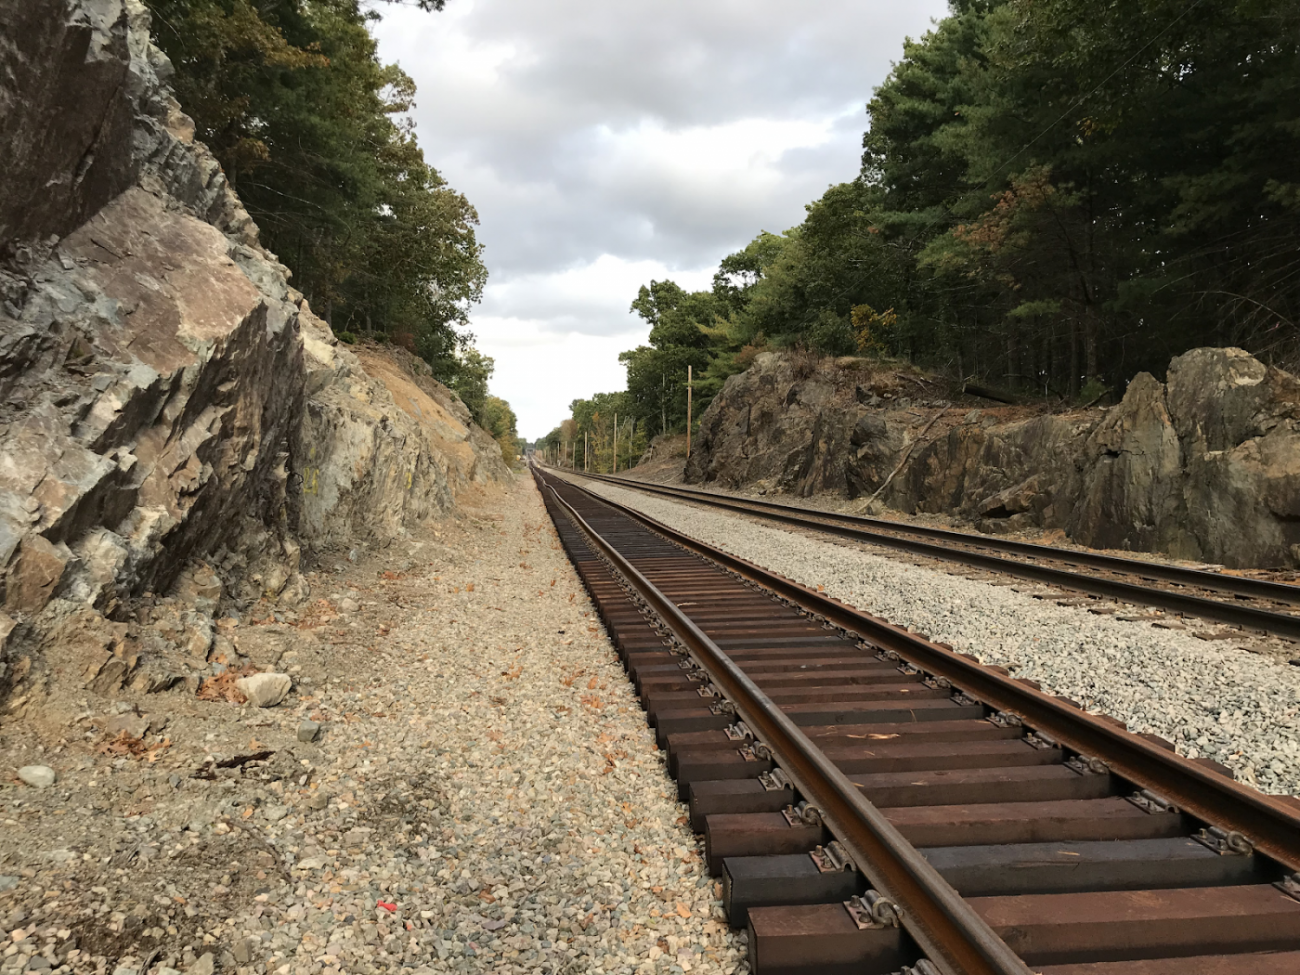 New tracks were installed parallel to the existing track after excavating the adjacent rocks and installing a drainage system (October 2019)